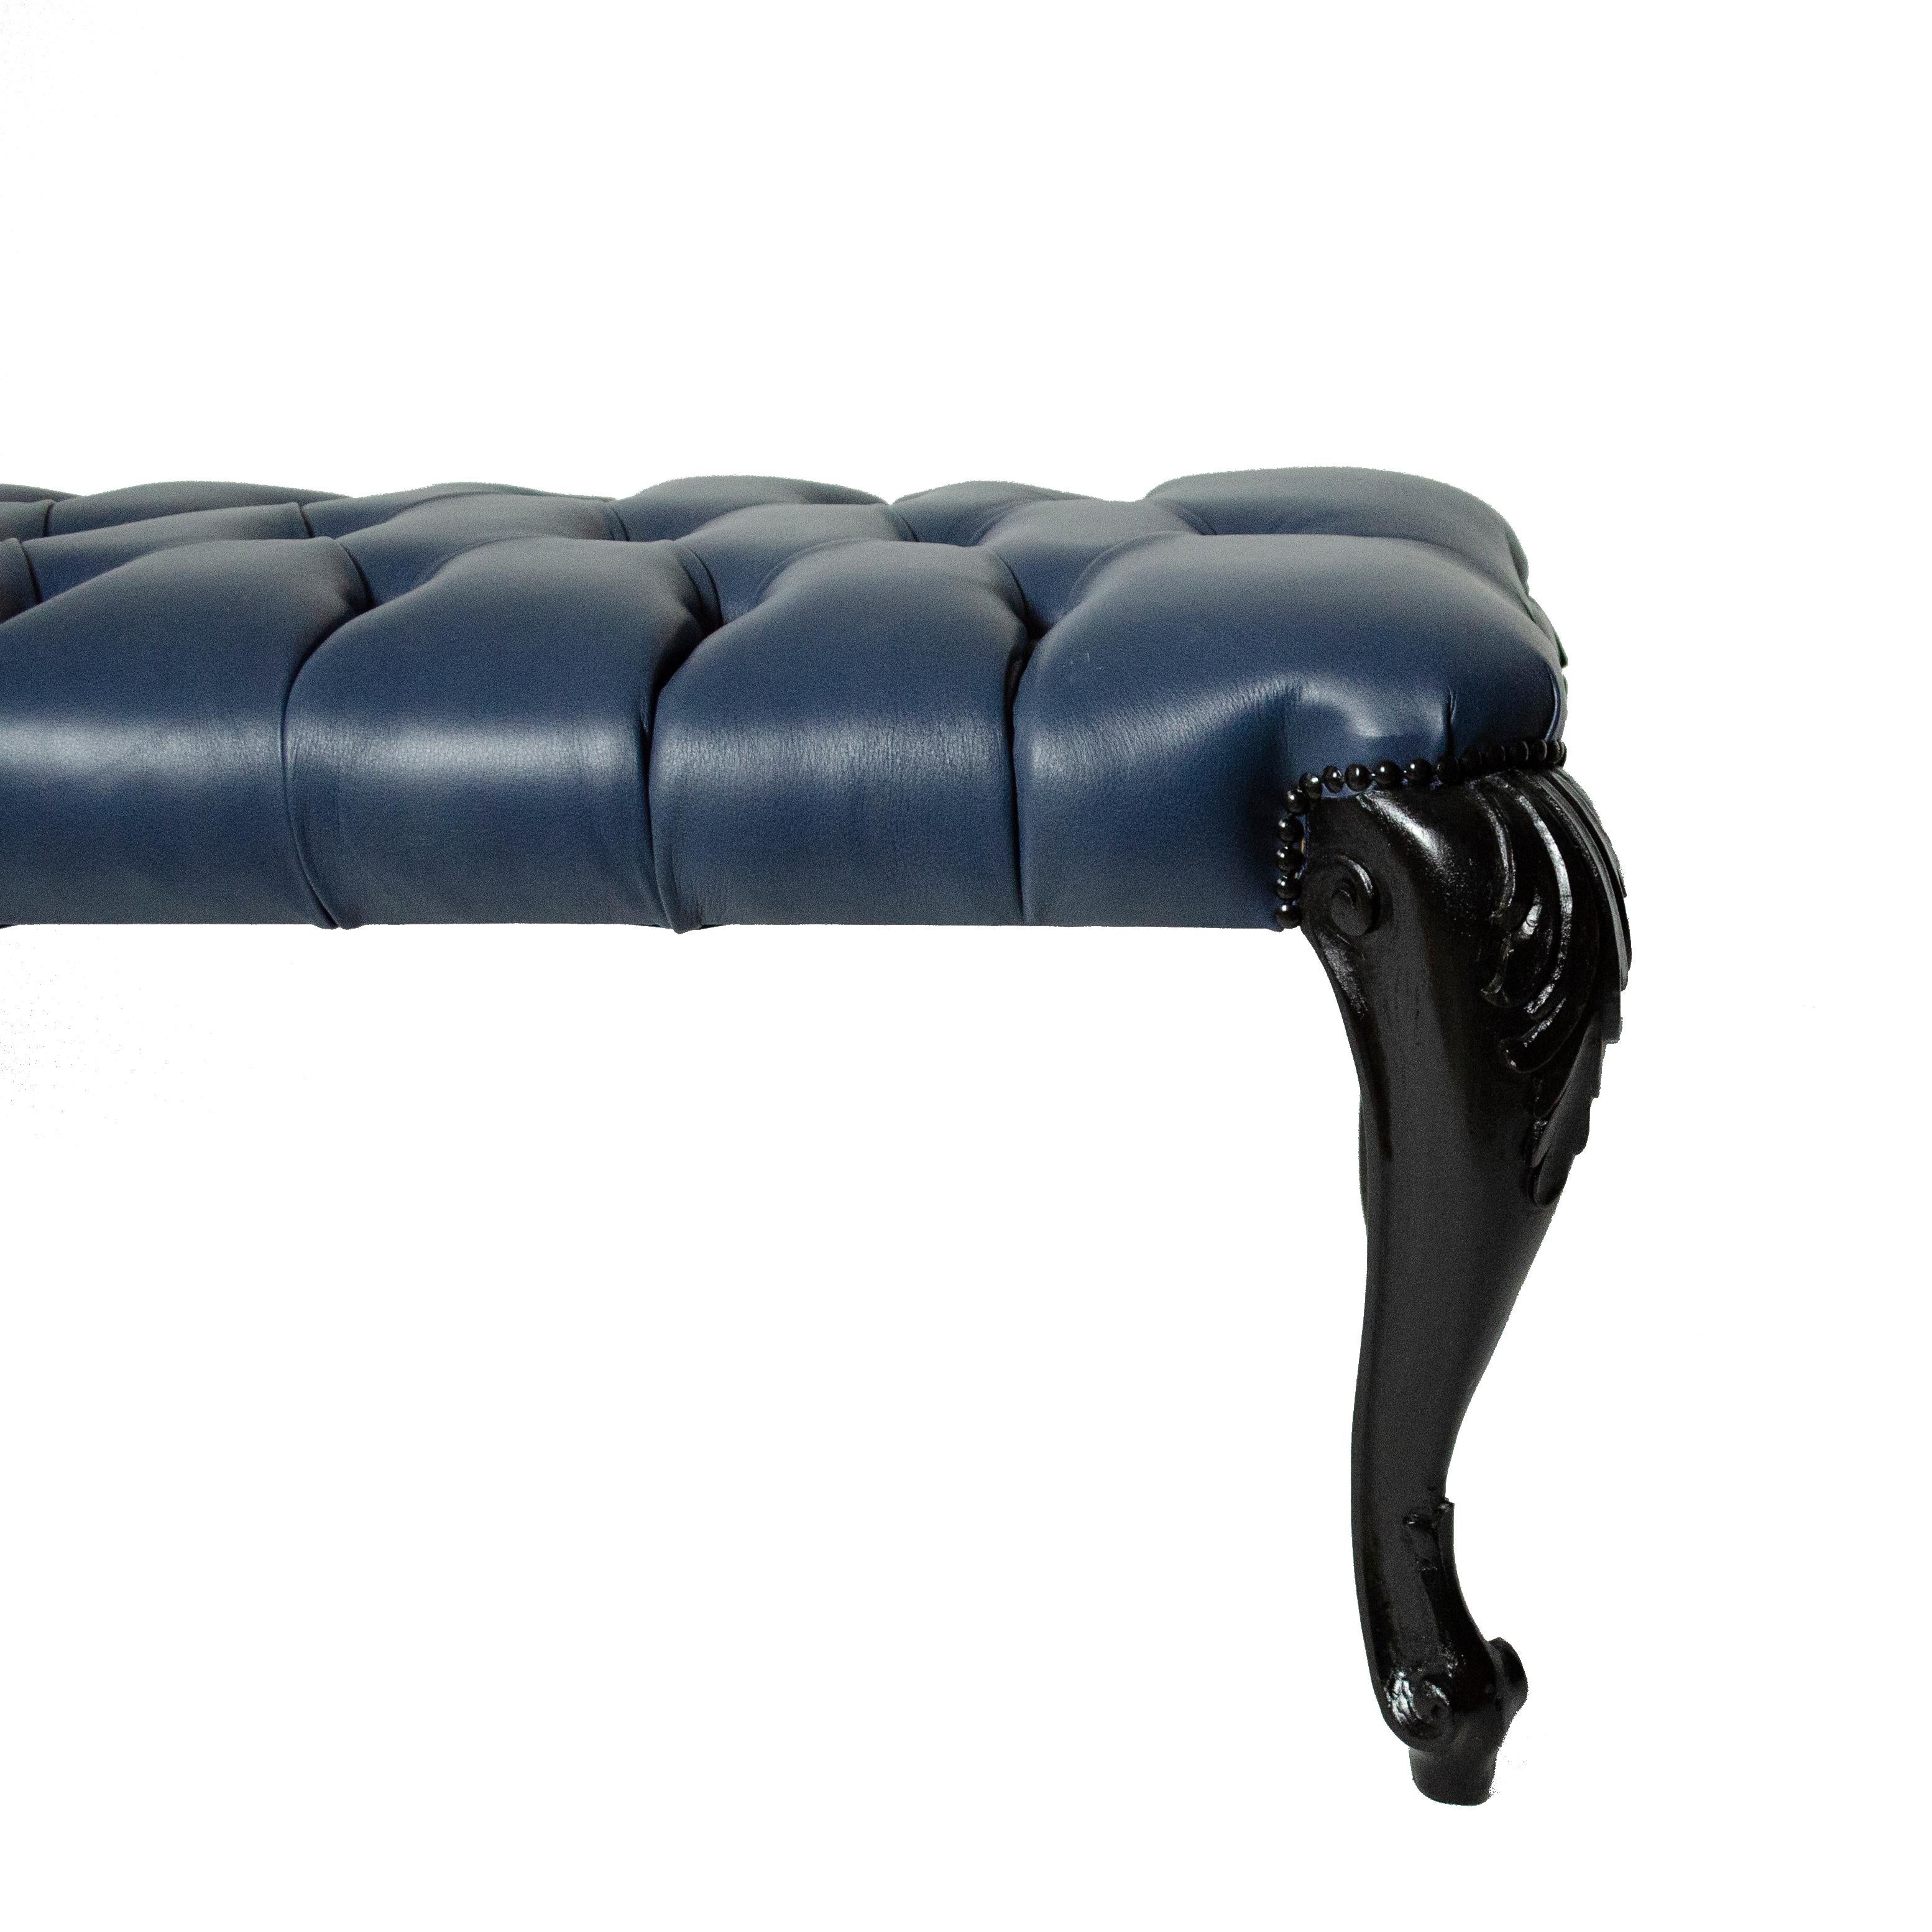 Blue leather reupholstered long bench with black ebonite and engraved legs.
How to set in a room, this kind of bench is perfect at the end of a bed, along a corridor, in an entrance, to complete seats in a living room. 






 